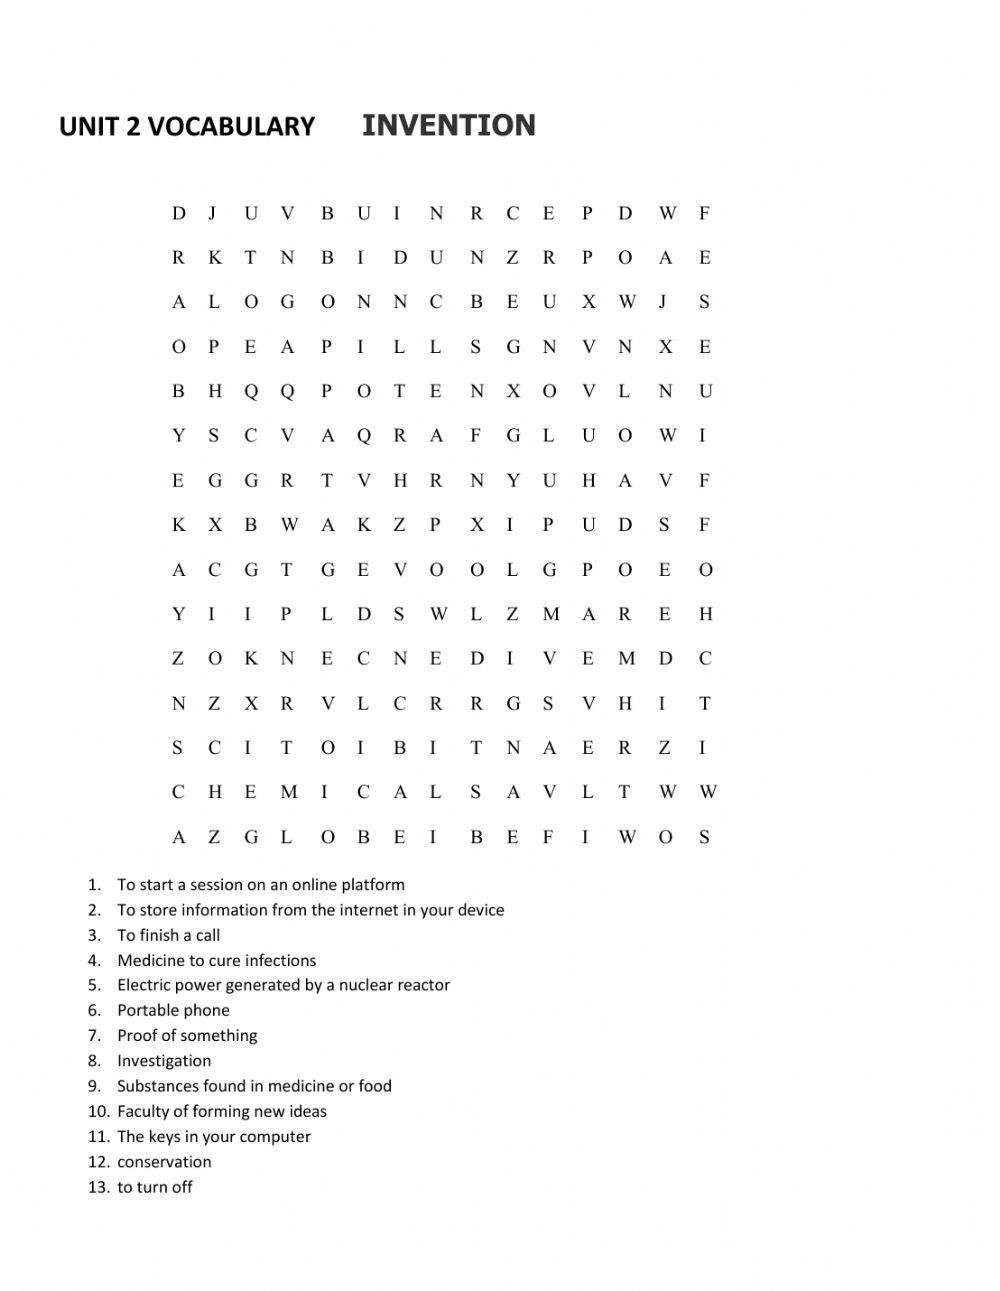 Inventions word search